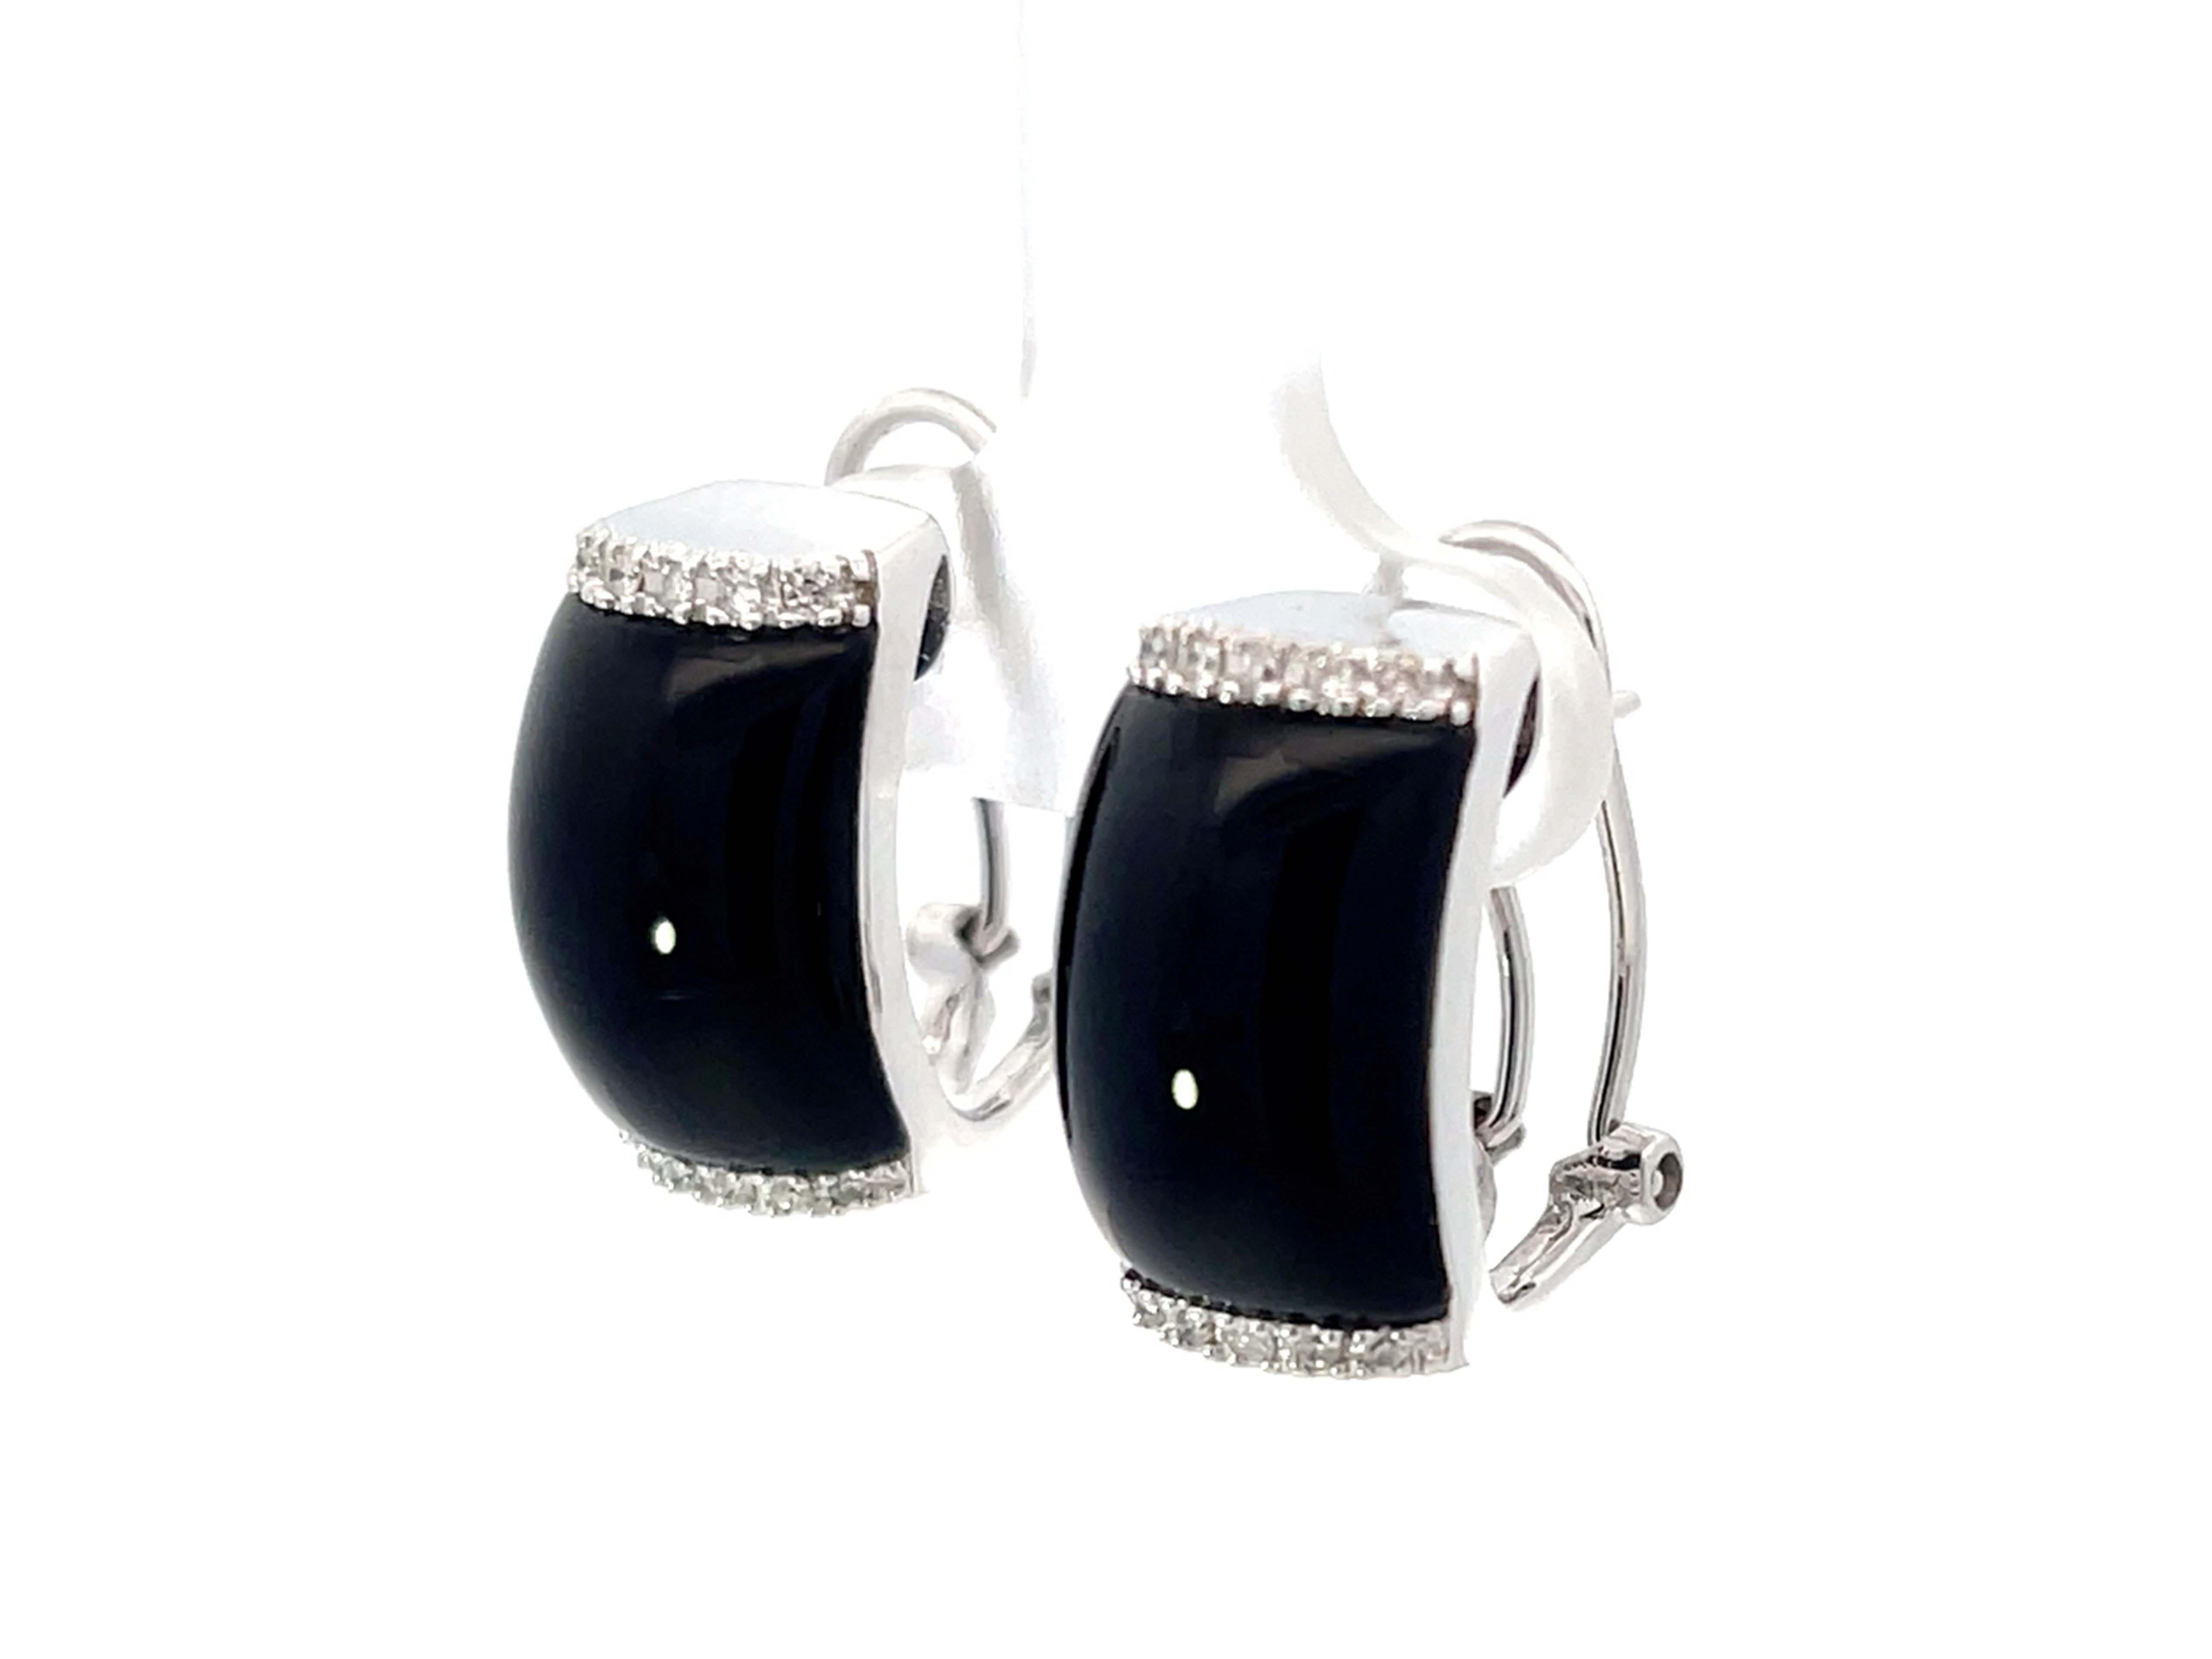 Cabochon Black Onyx and Diamond Earrings 14k White Gold For Sale